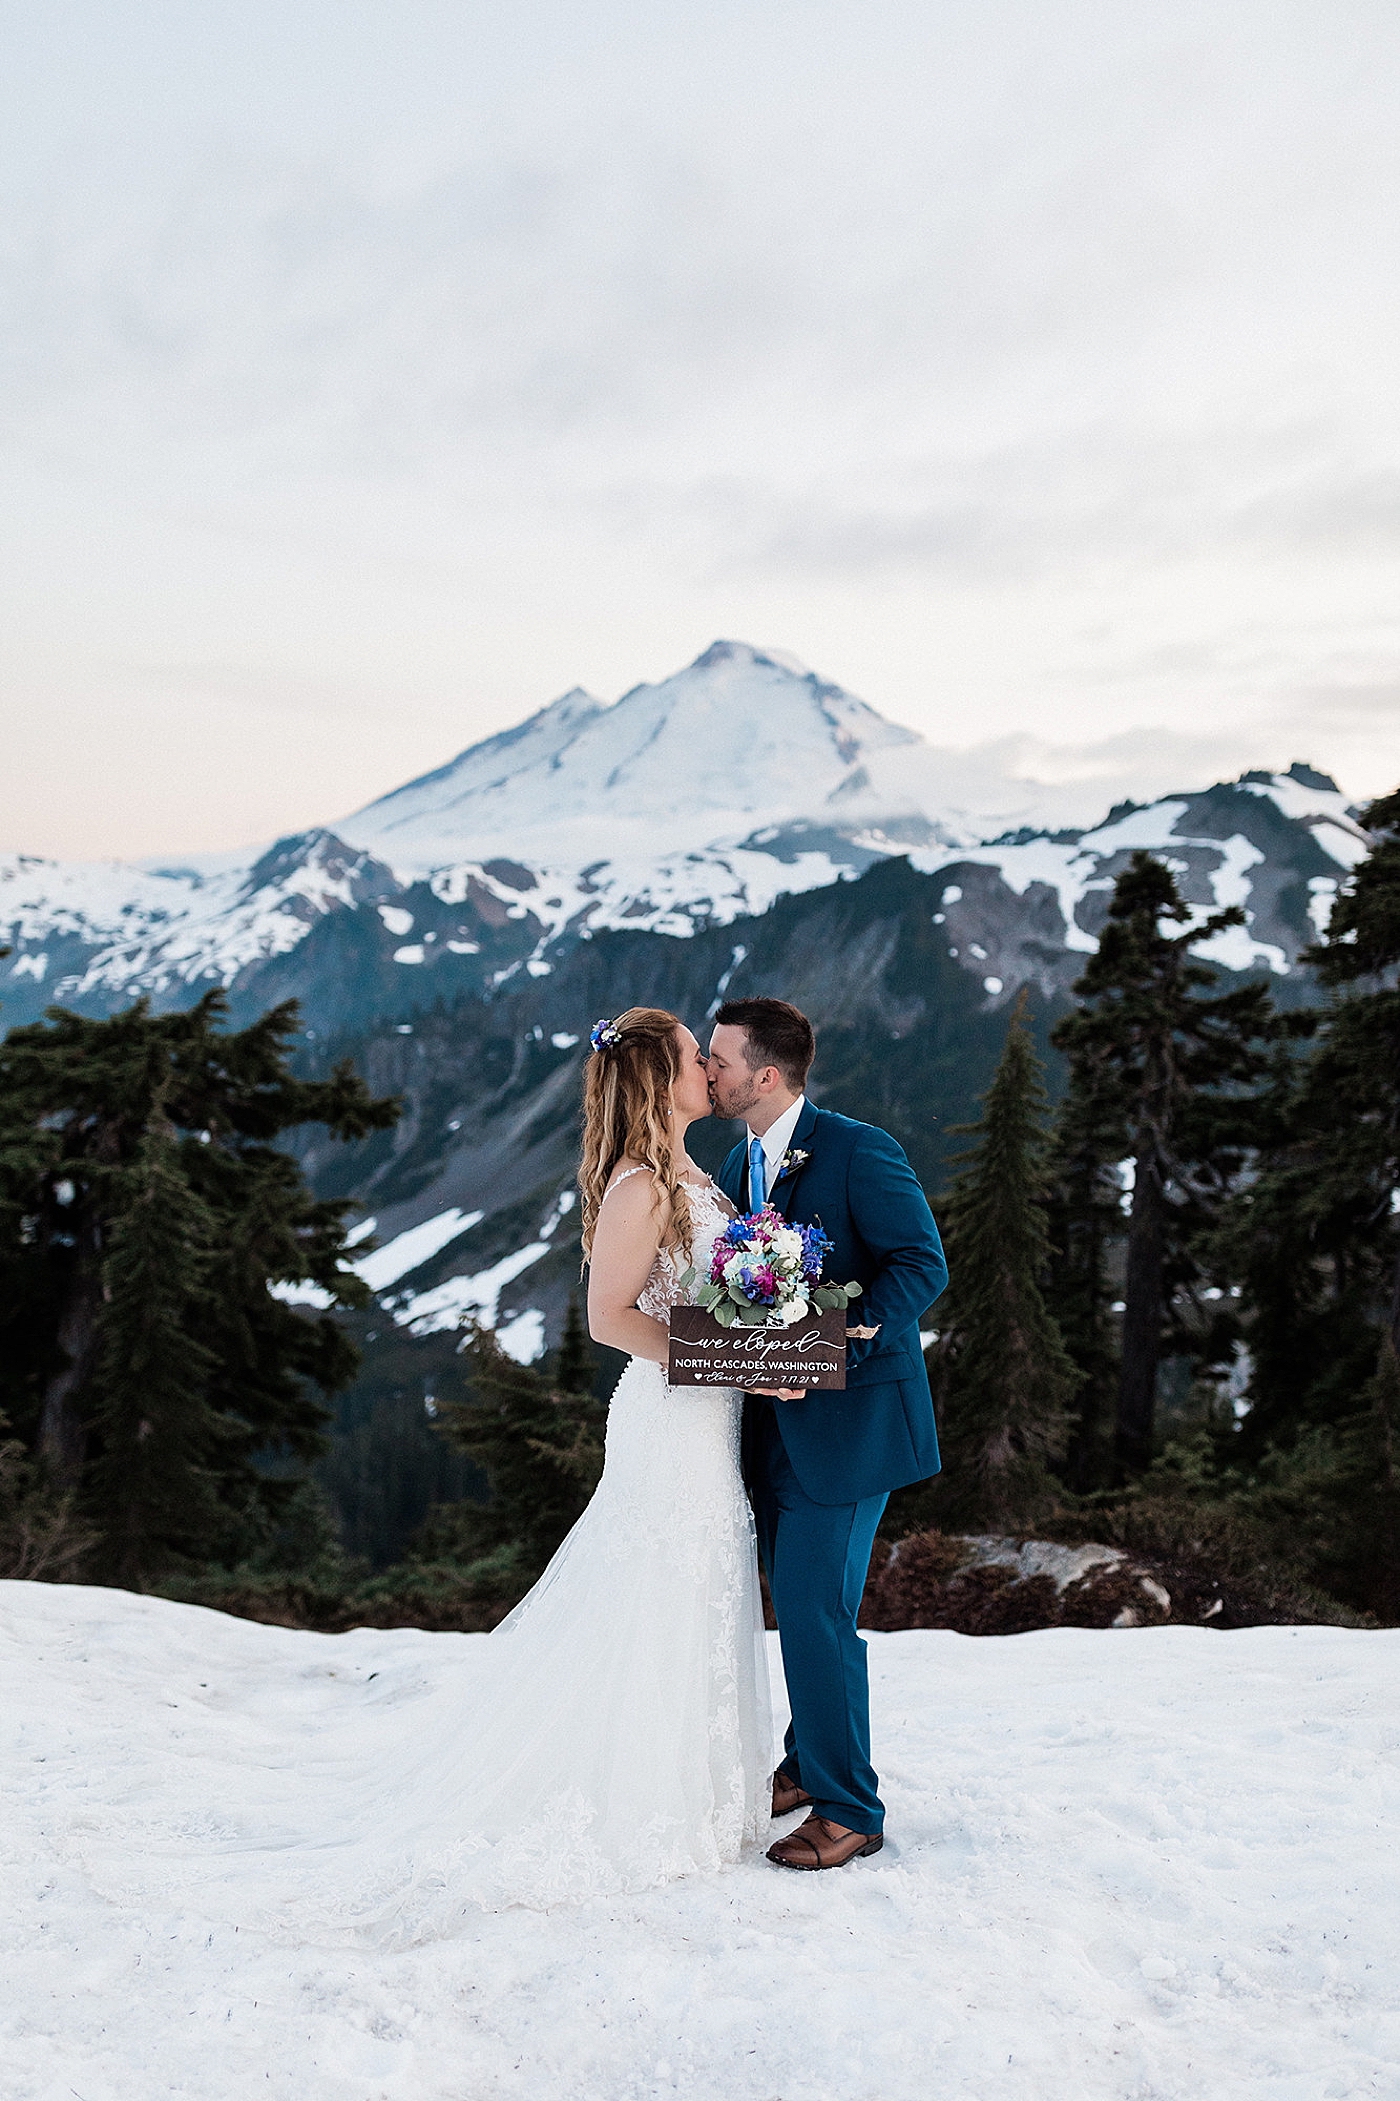 Couple kissing in the snow with elopement sign. Photo by Megan Montalvo Photography.